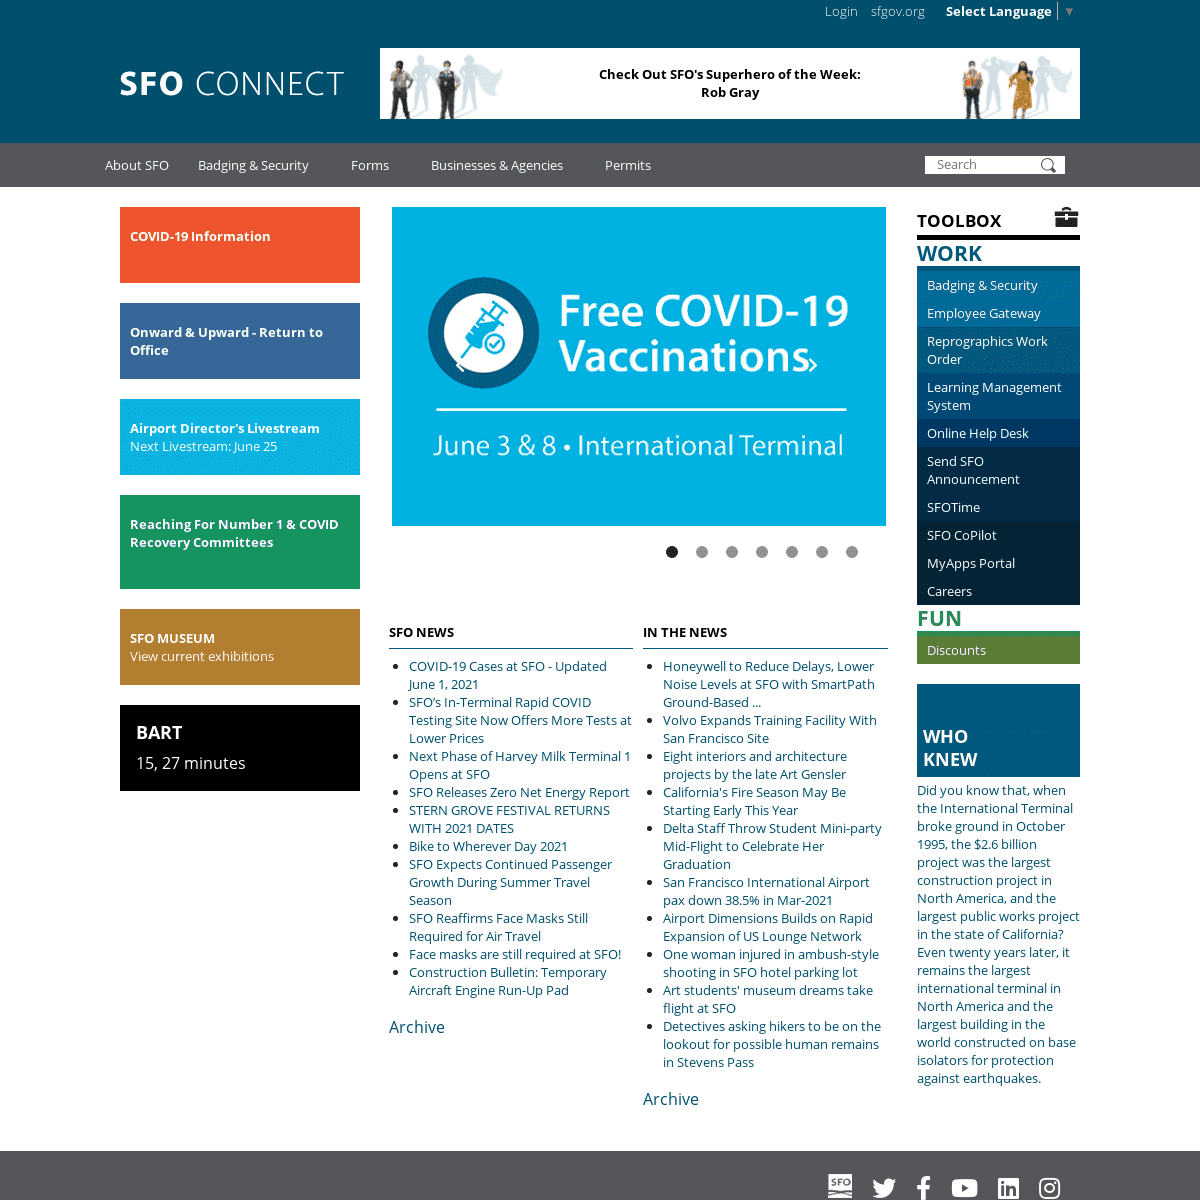 A complete backup of https://sfoconnect.com